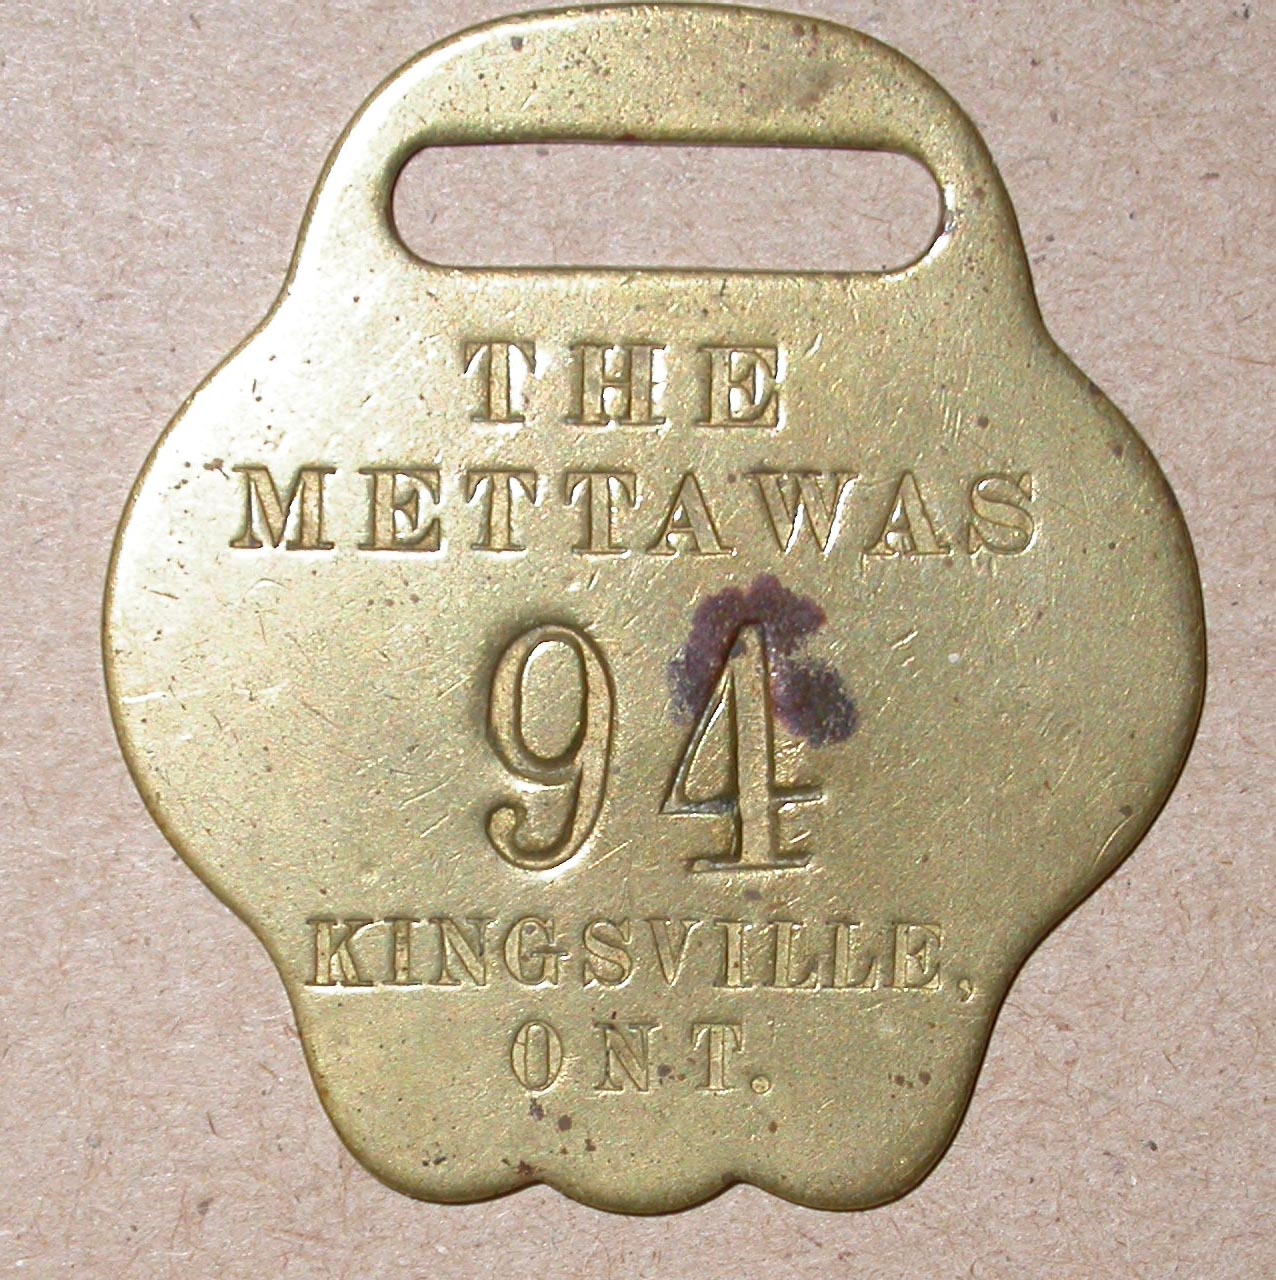 a%20gold%20tag%20for%20a%20room%20key%20from%20The%20Mettawas%20Hotel%20in%20Kingsville%2C%20Ontario